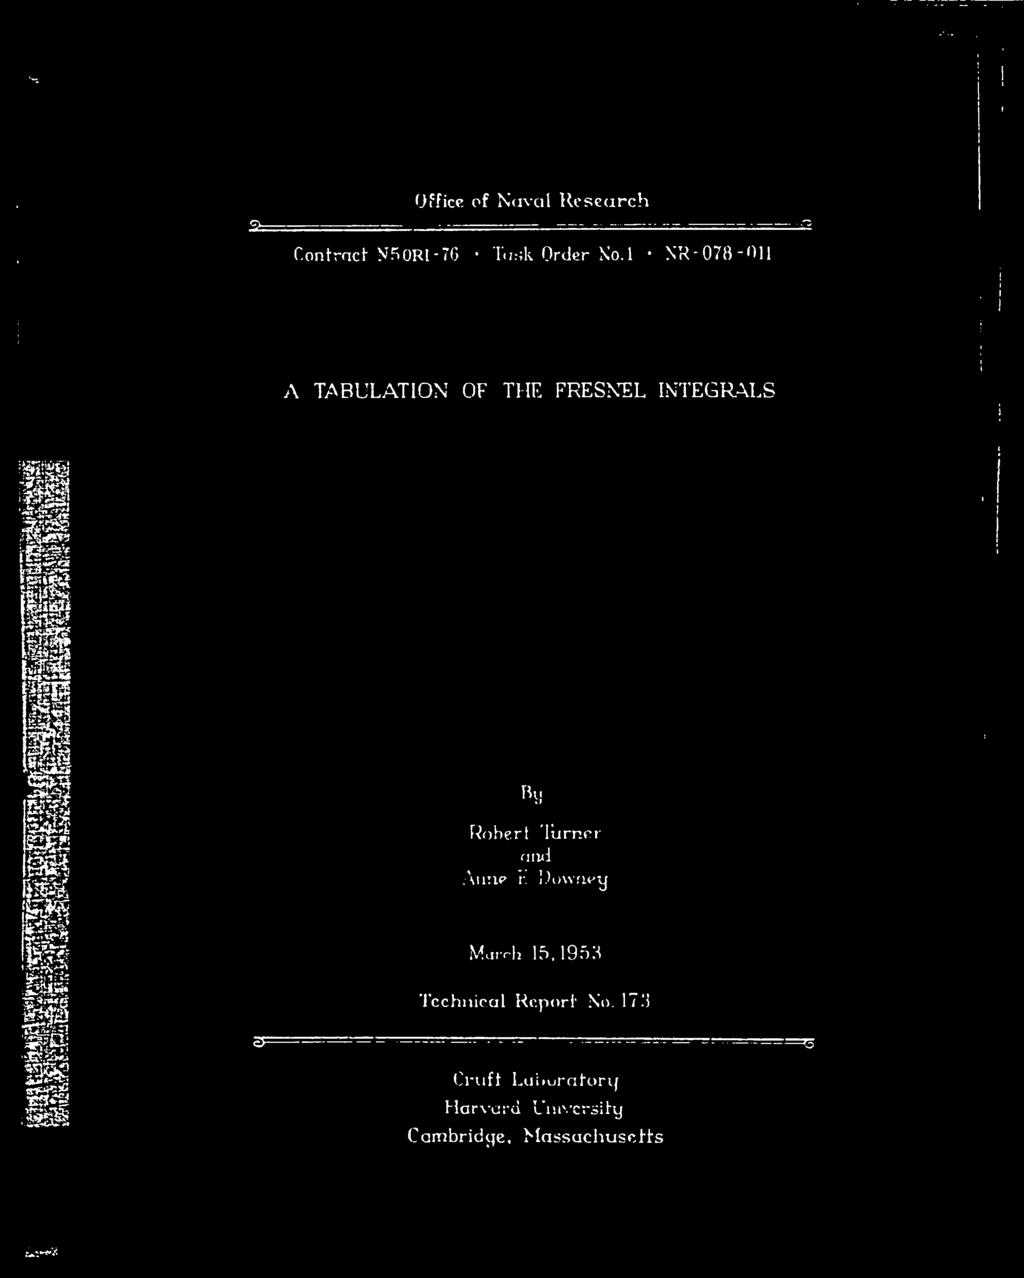 lurner and Auric r. Downey Marrh 15,1953 Technical Report - No.